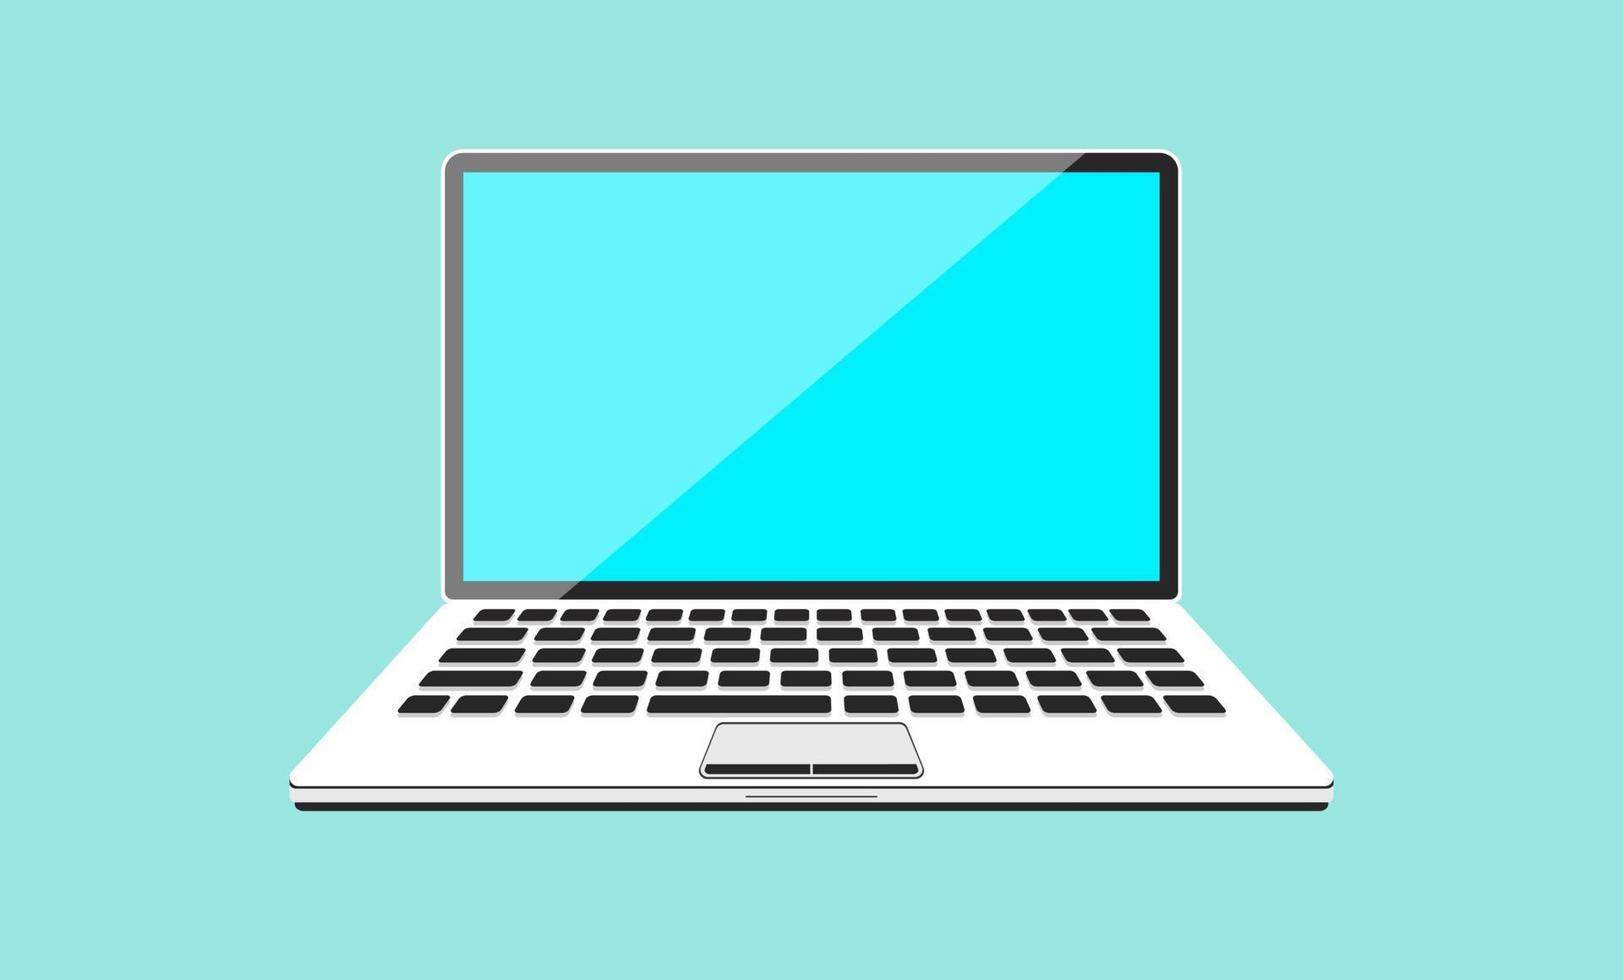 Glossy Laptop Isolated Vector Illustration